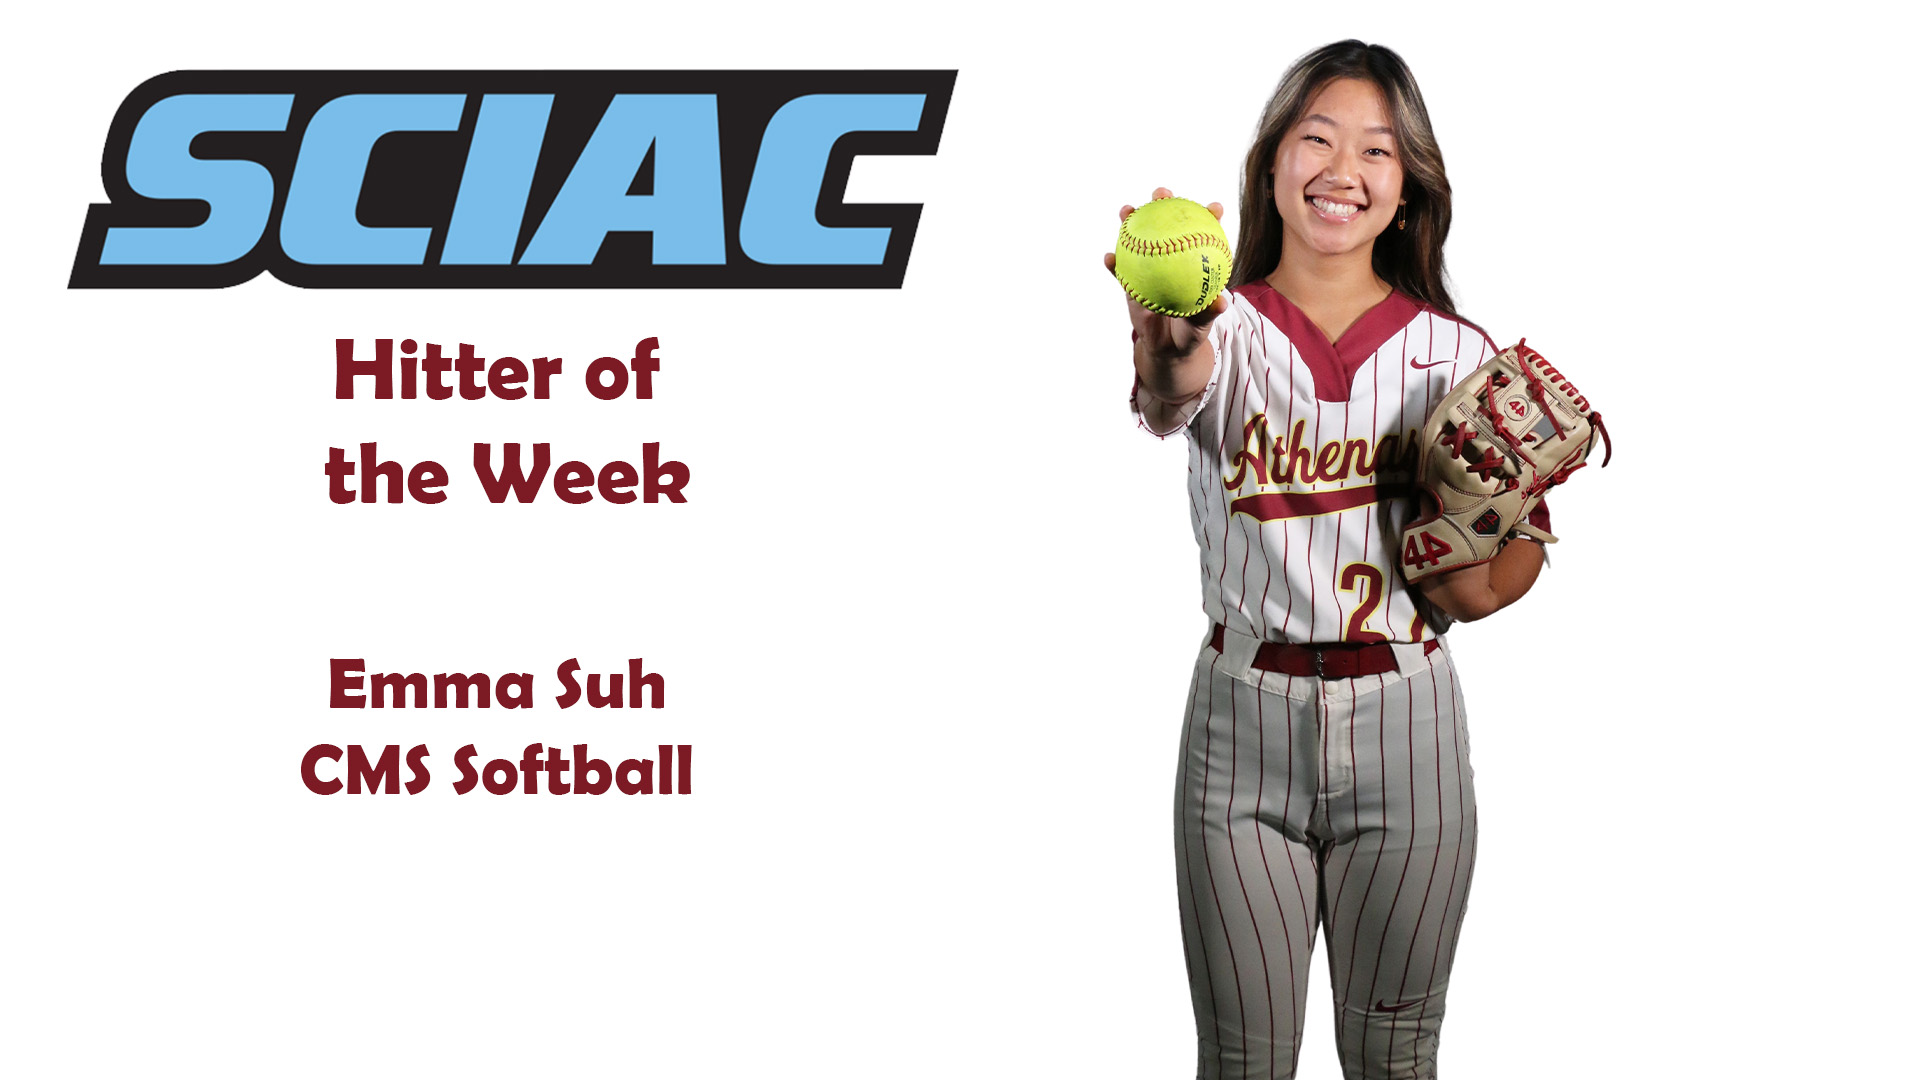 Posed shot of Emma Suh with SCIAC logo